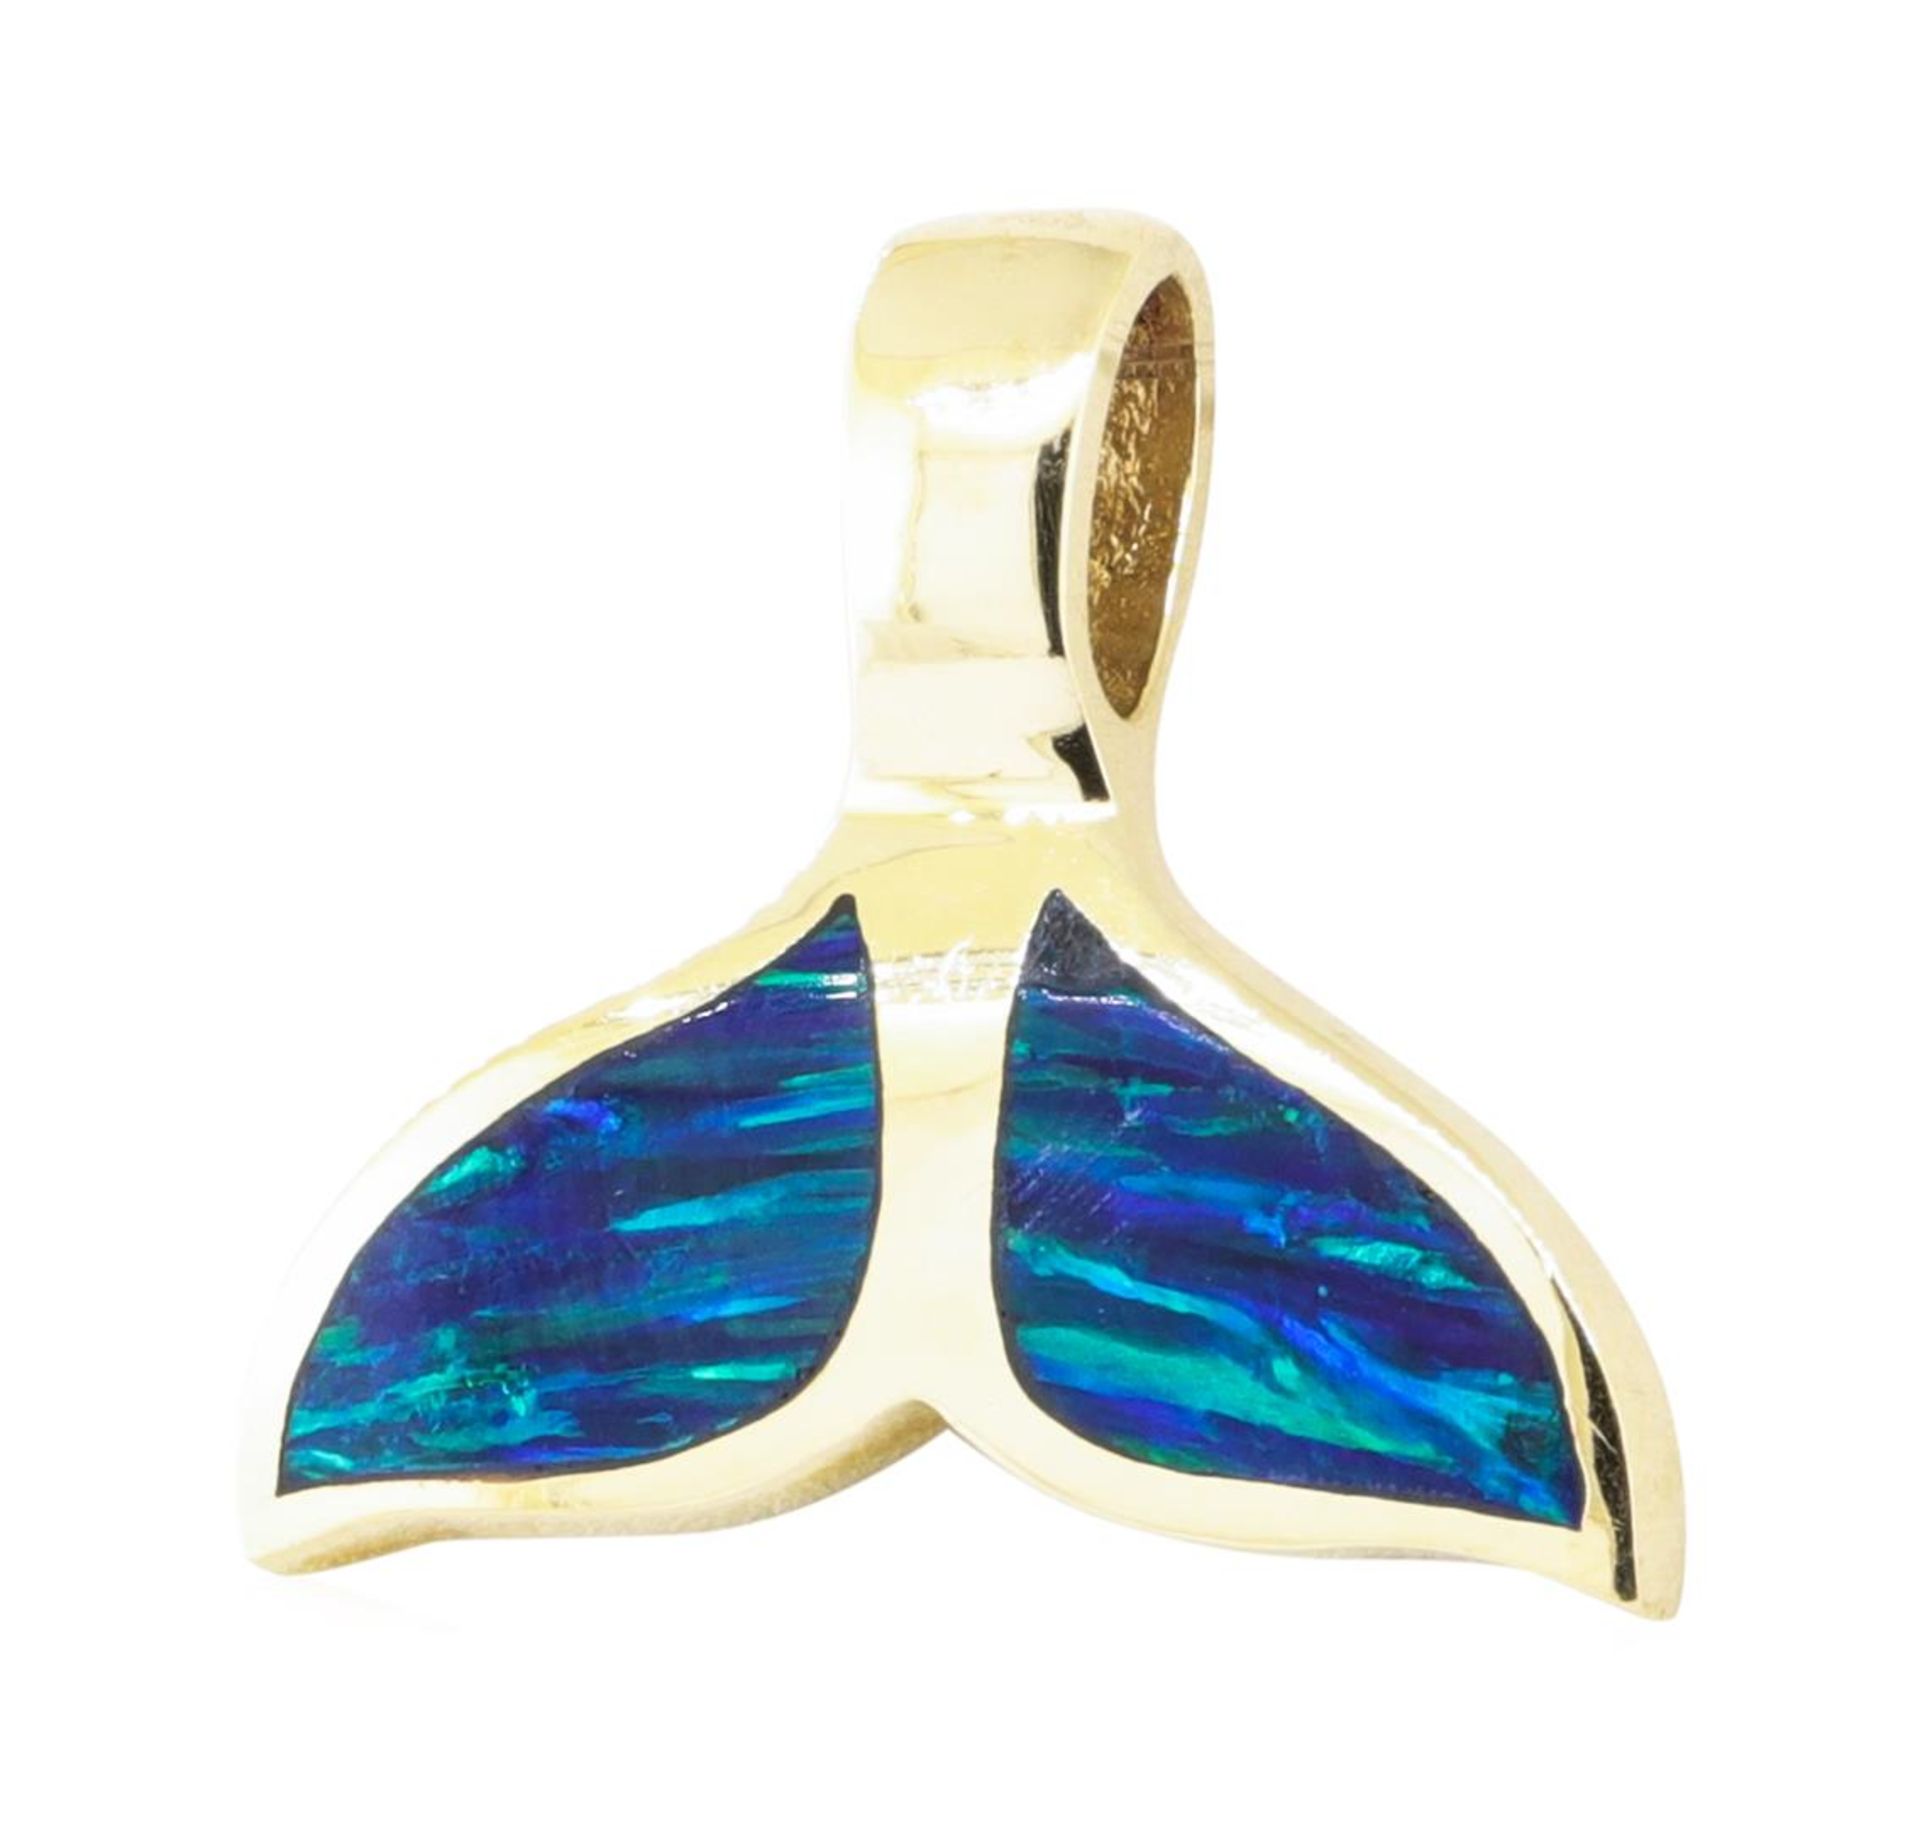 Inlaid Opal Whale's Tail Pendant - 14KT Yellow Gold - Image 2 of 2